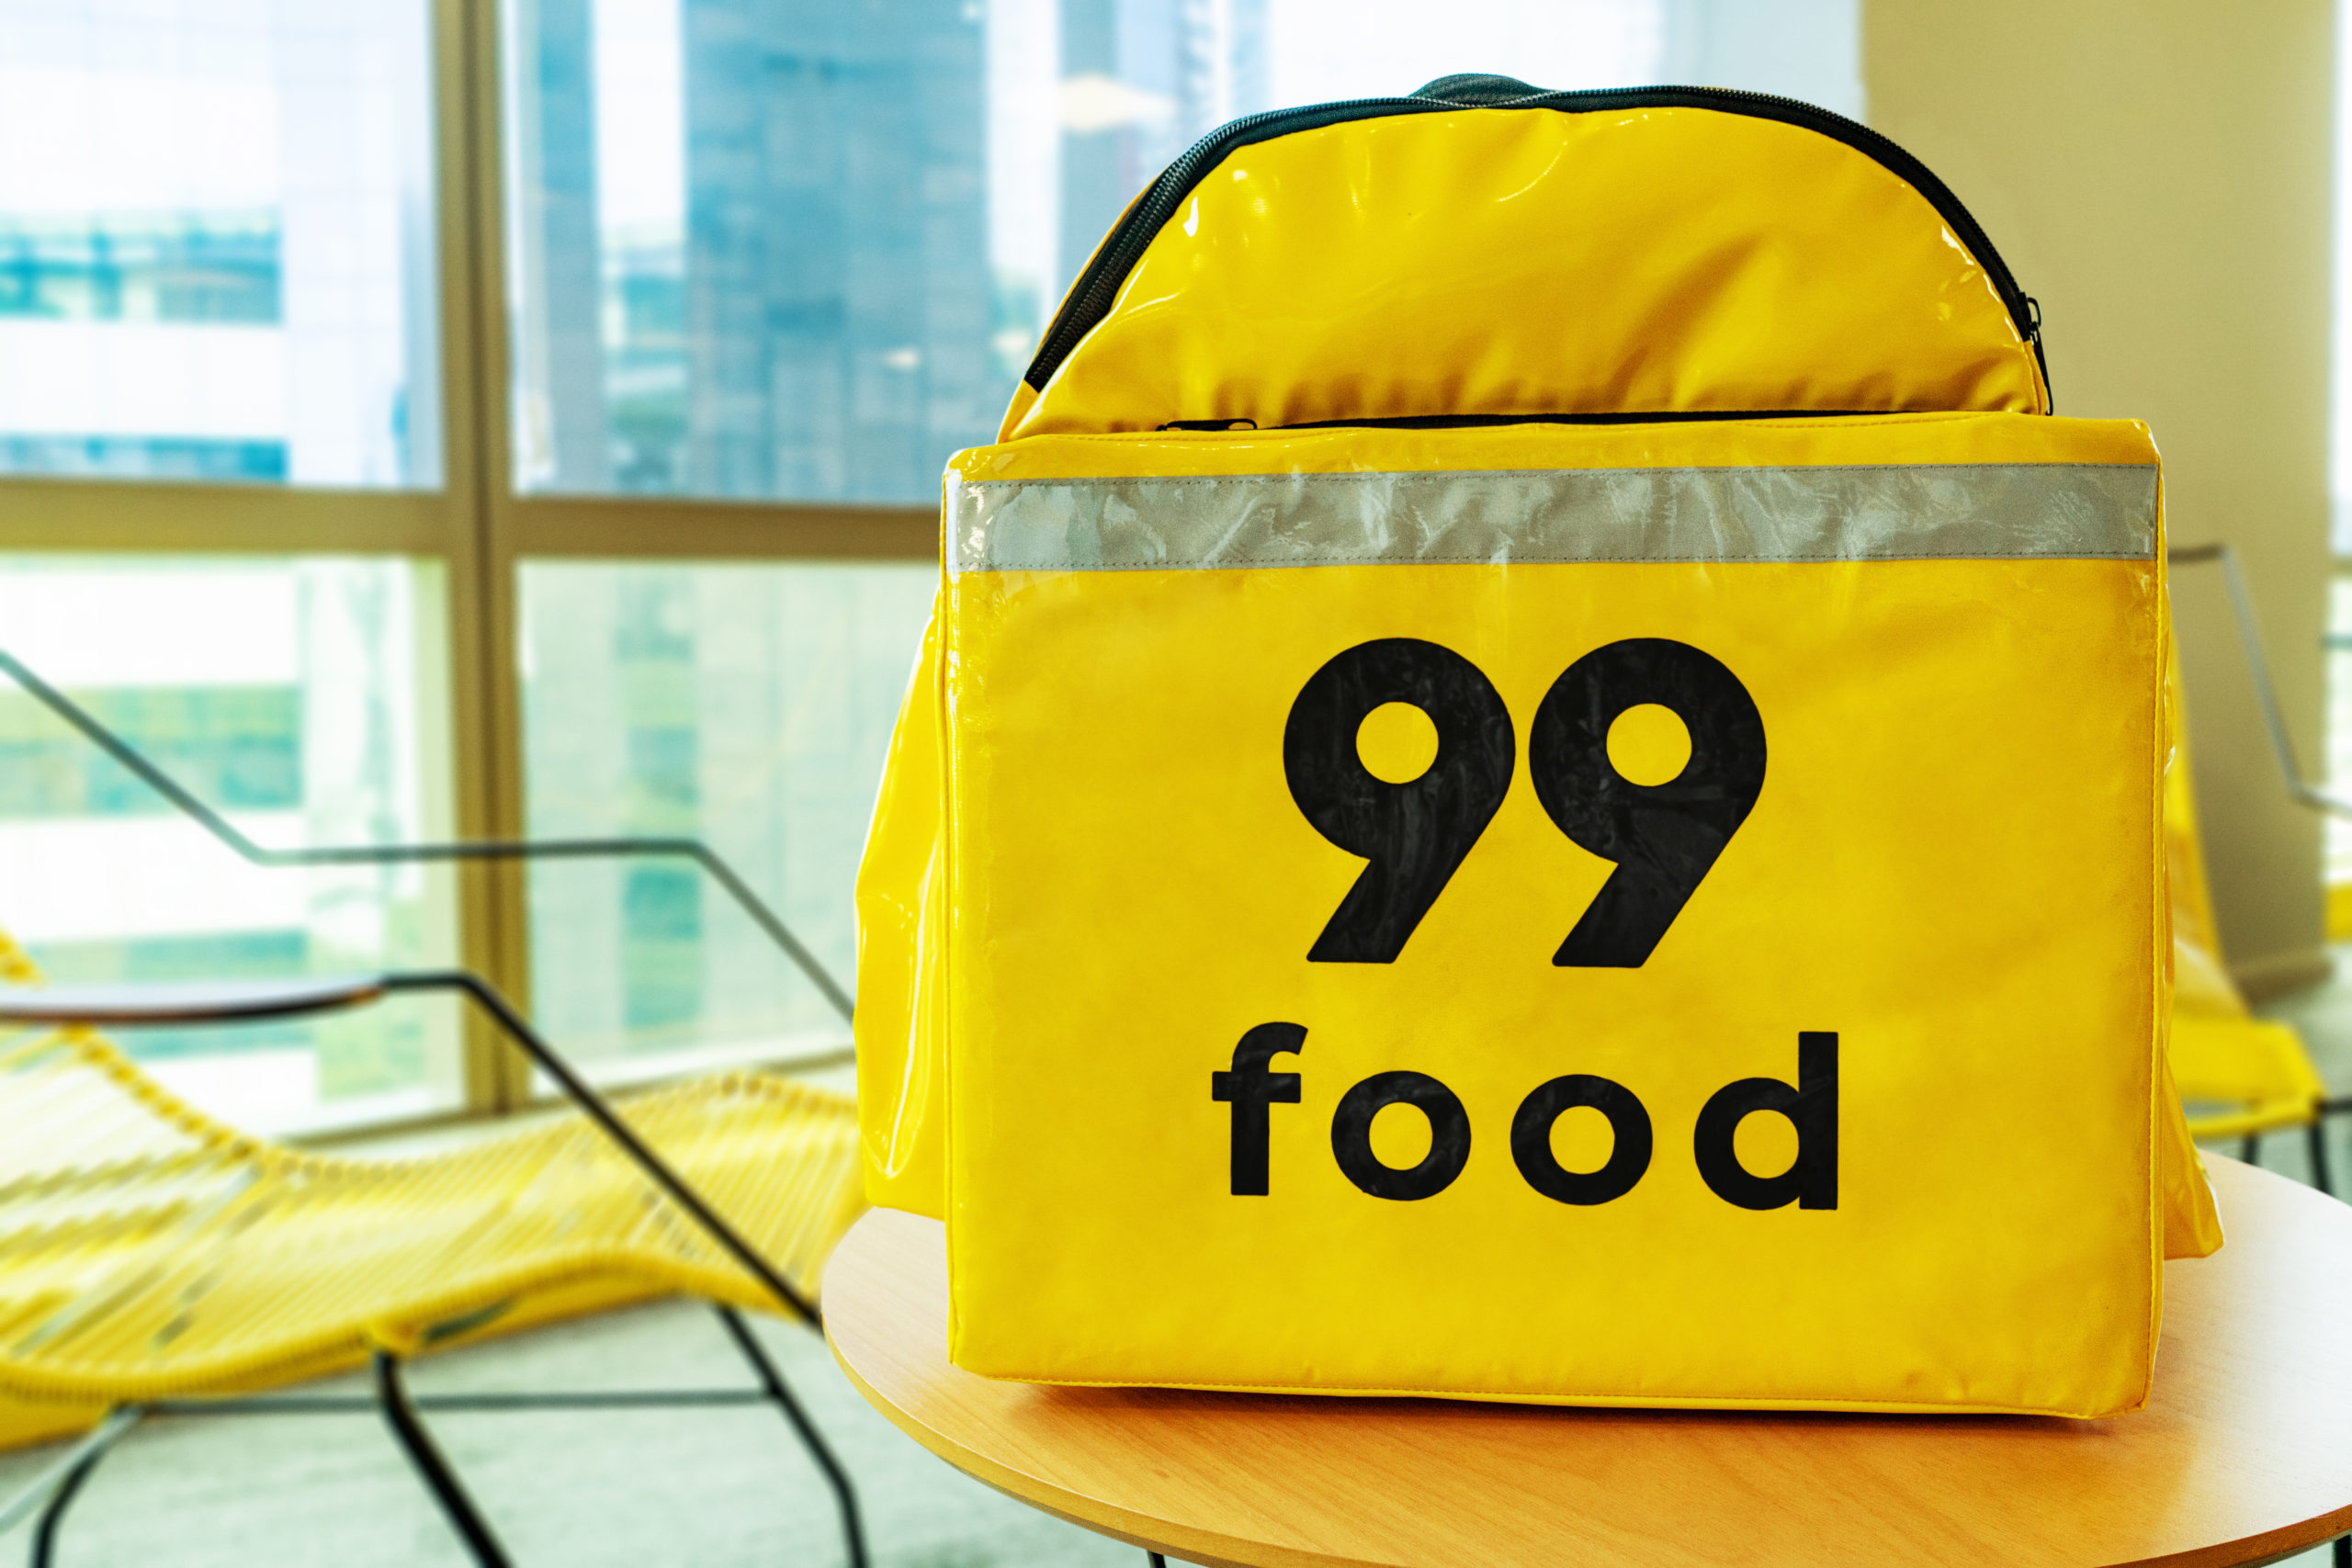 99Food “steps on the brakes” and ends partnership with couriers